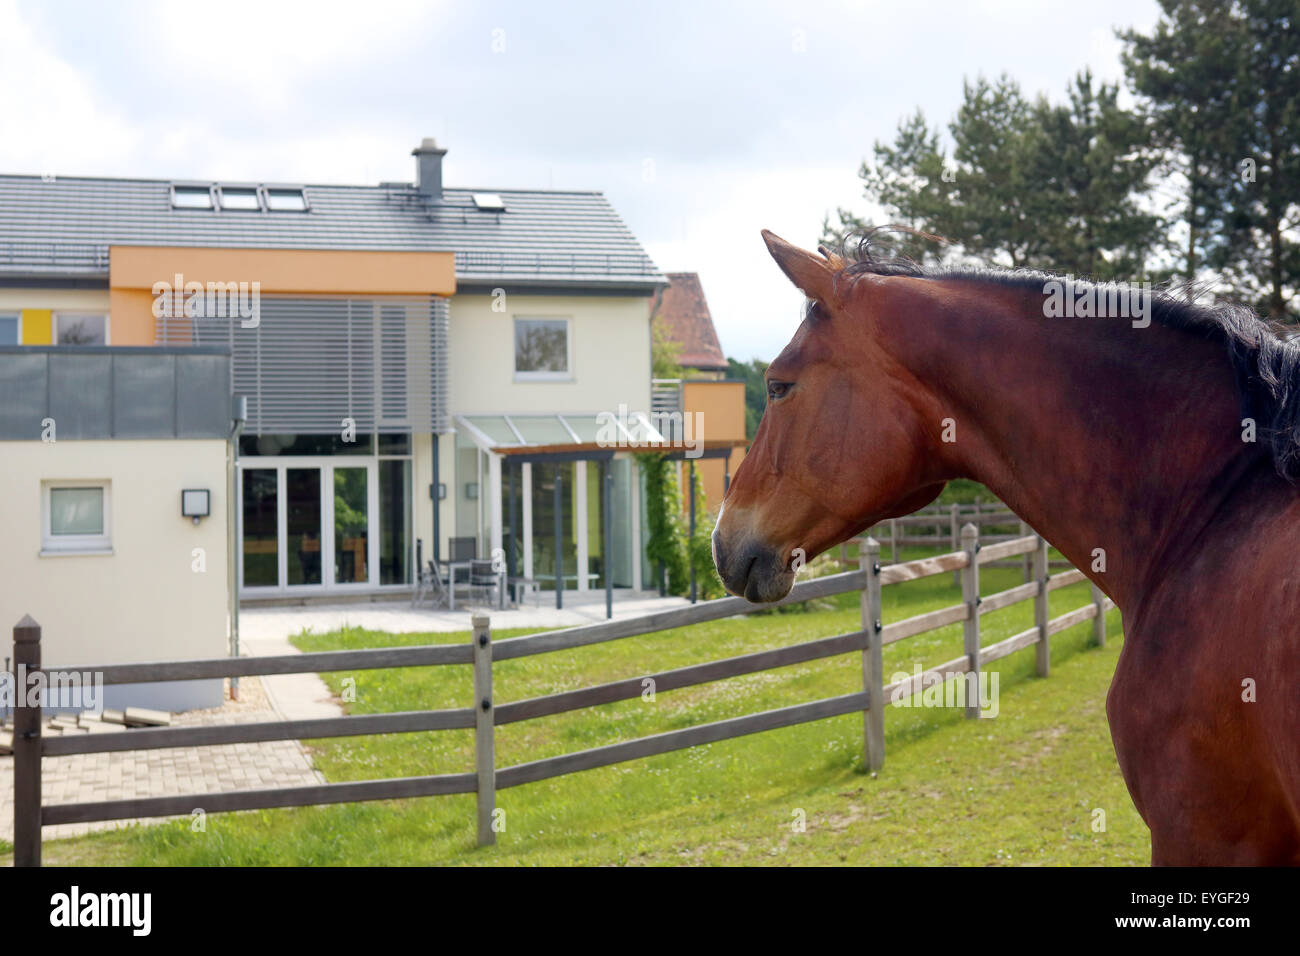 Oberoderwitz, Germany, horse in a paddock in front of two detached houses Stock Photo